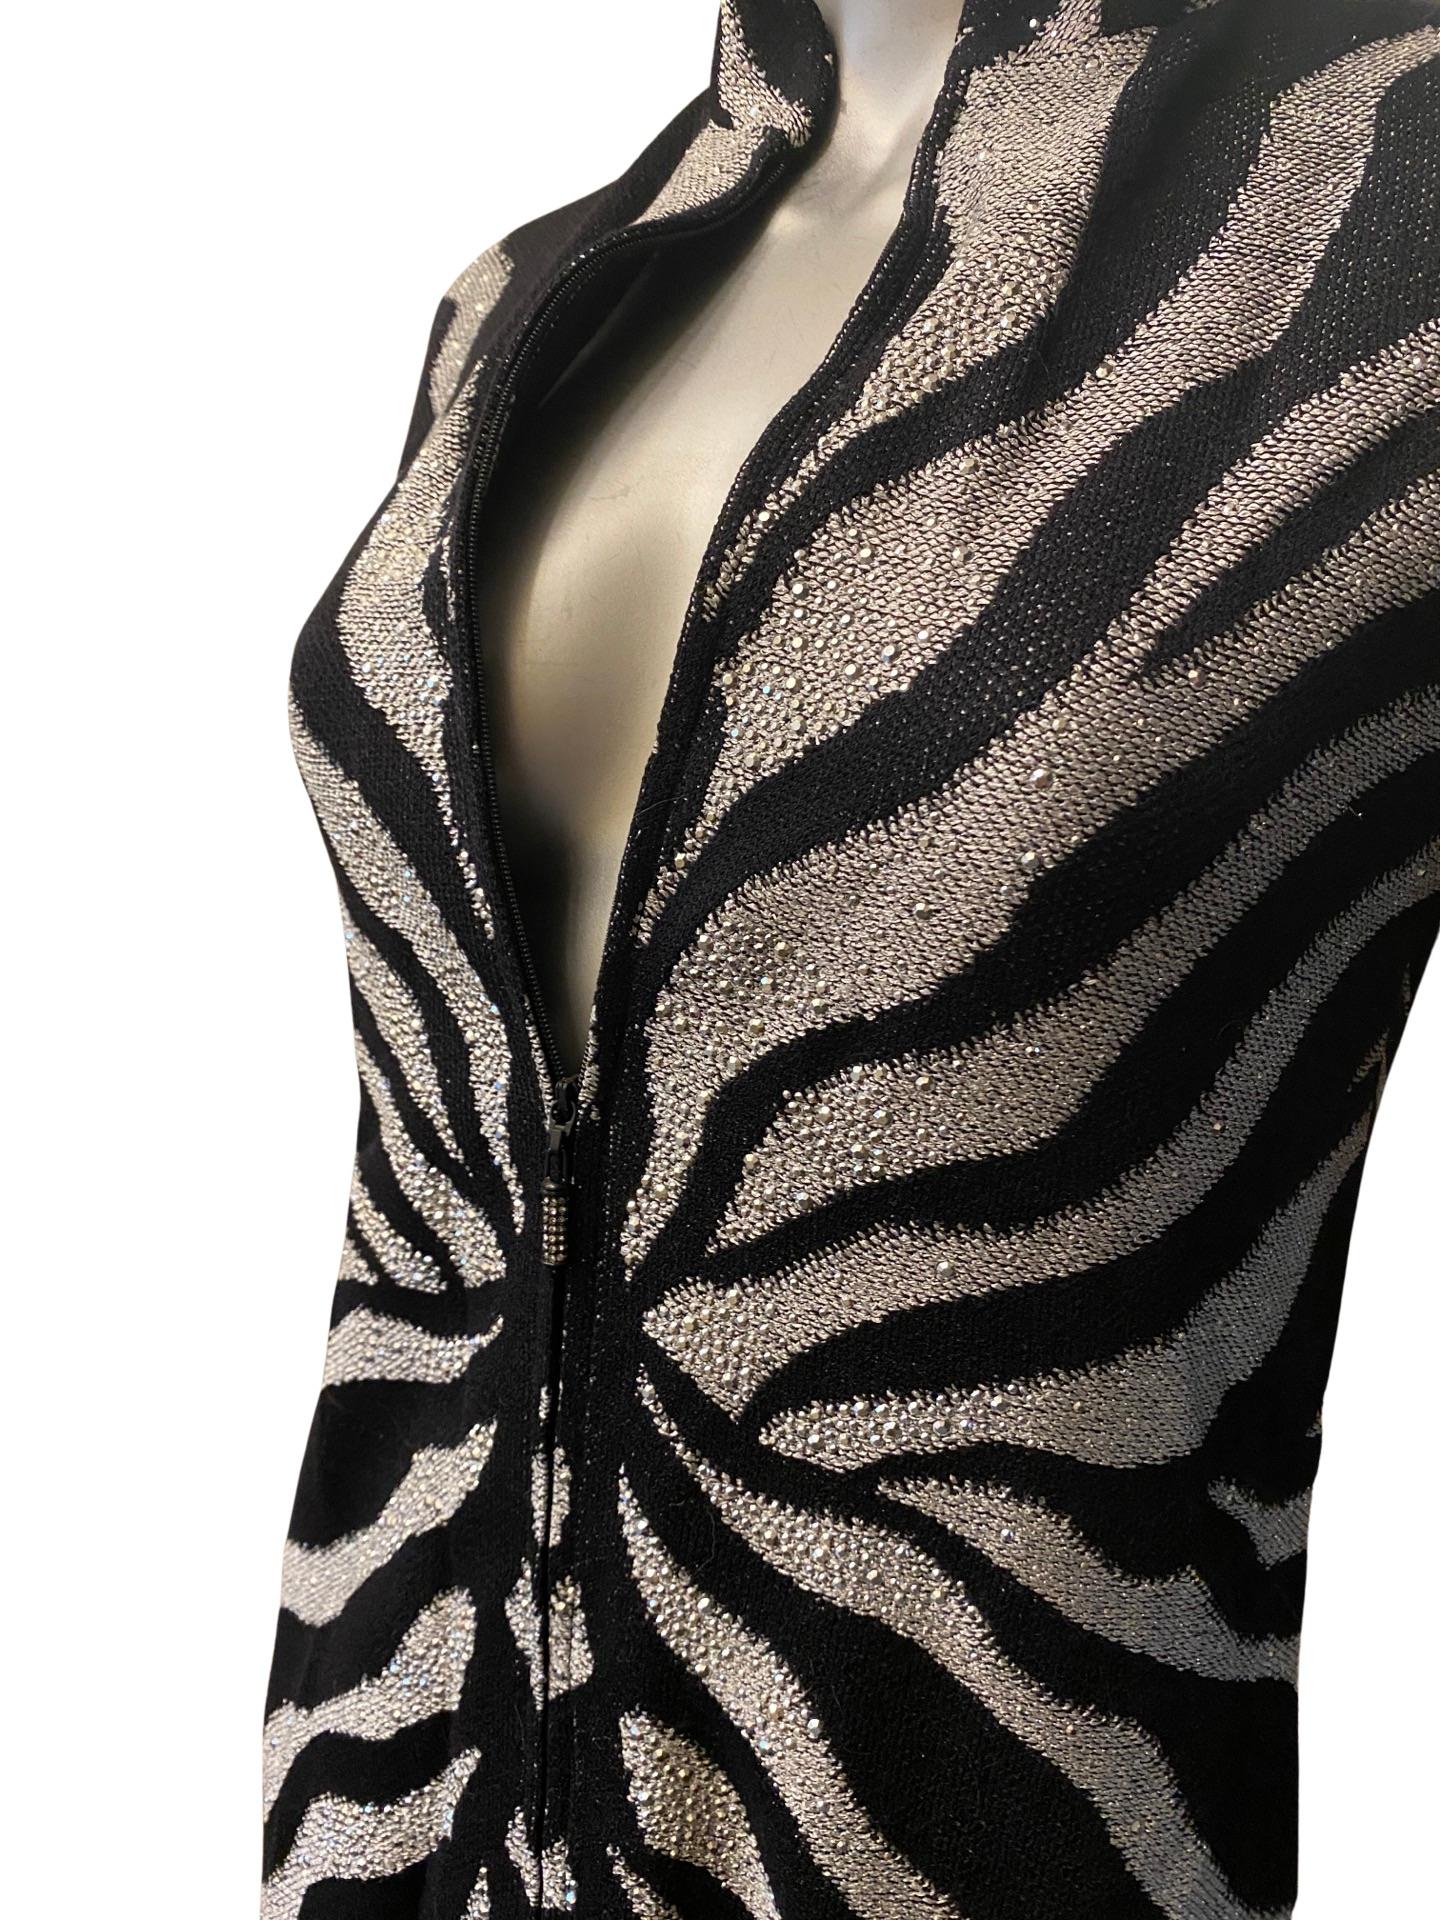 St John Evening Zebra Knit Zip Front Dress with Silver Beading Size 2 NWT For Sale 5